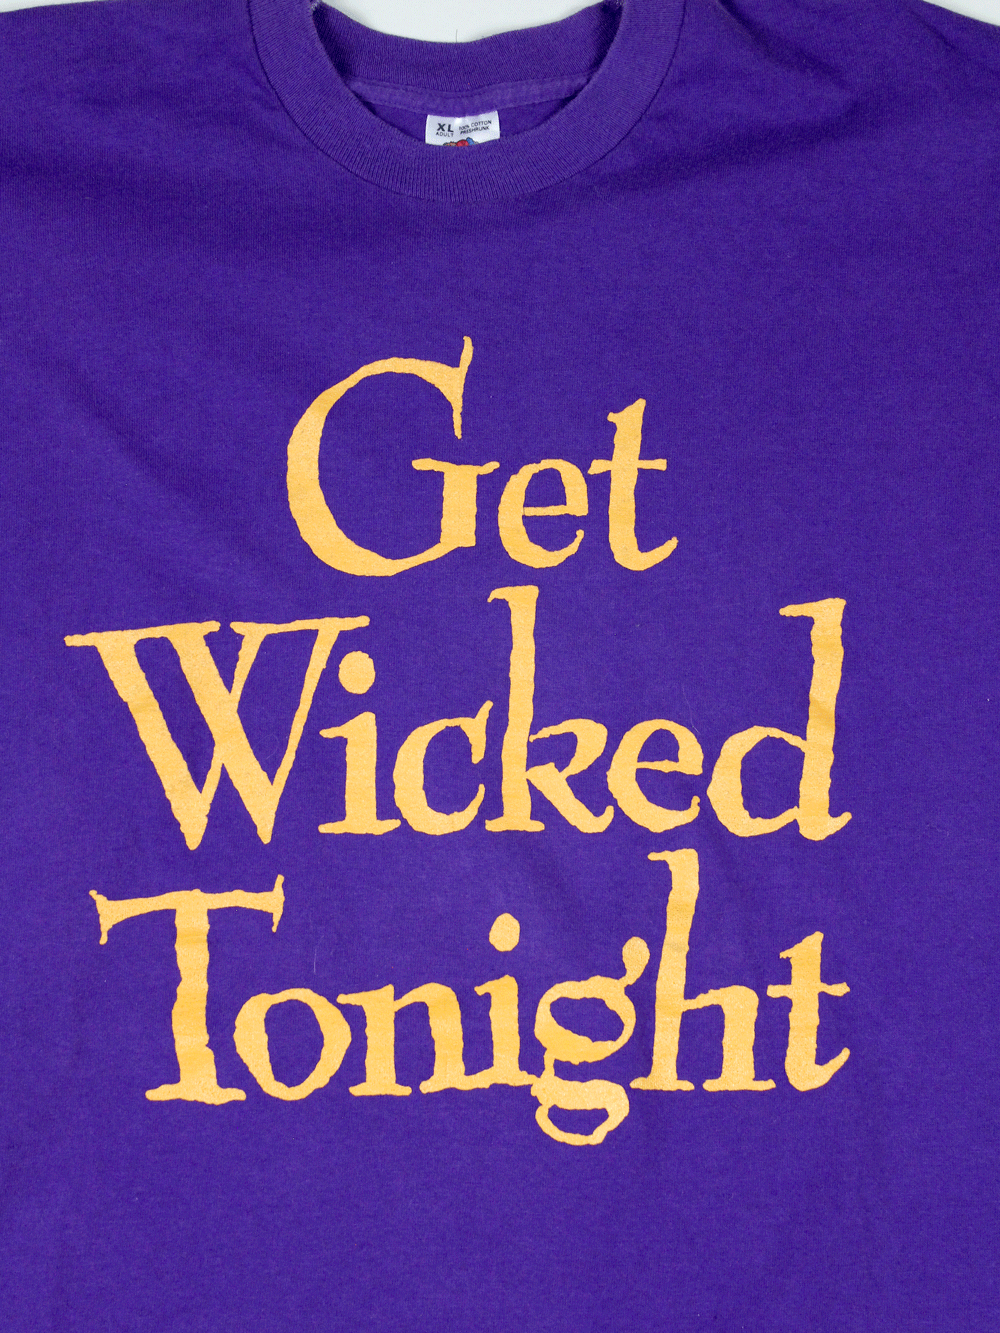 Vintage Wicked T-shirt